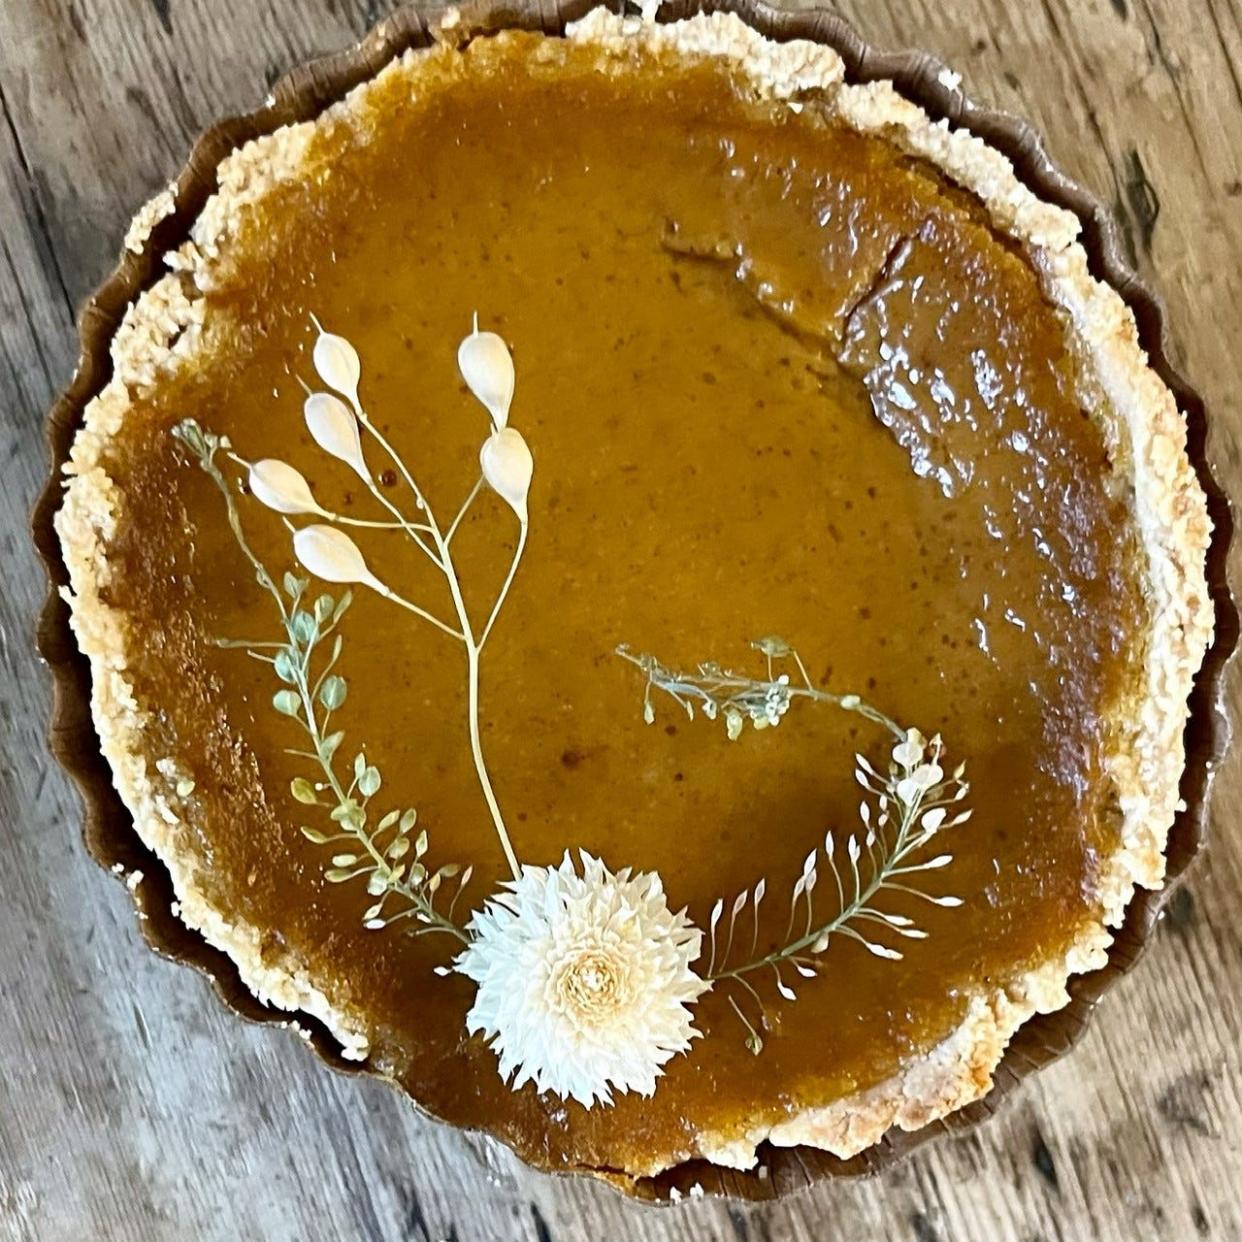 The Thanksgiving tart from Rockland County based Charlotte's Home Kitchen is made with made with organic homegrown pumpkins and organic maple syrup and is vegan and gluten-free.